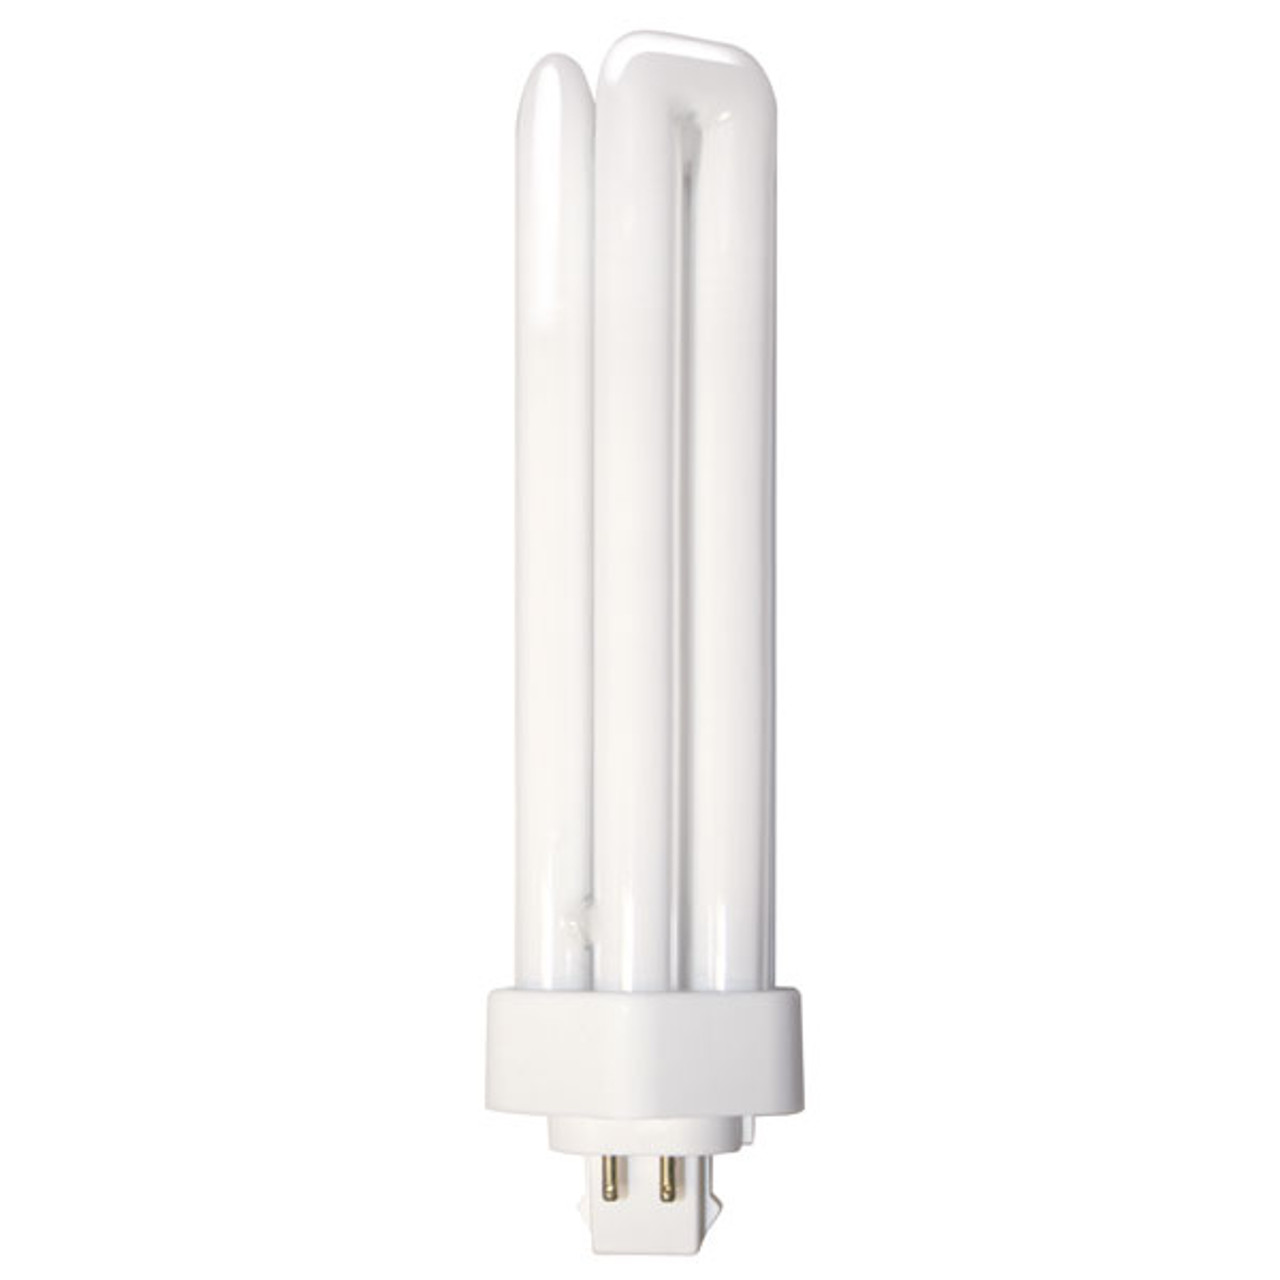 BELL 32W 4-Pin 827 Very Warm White